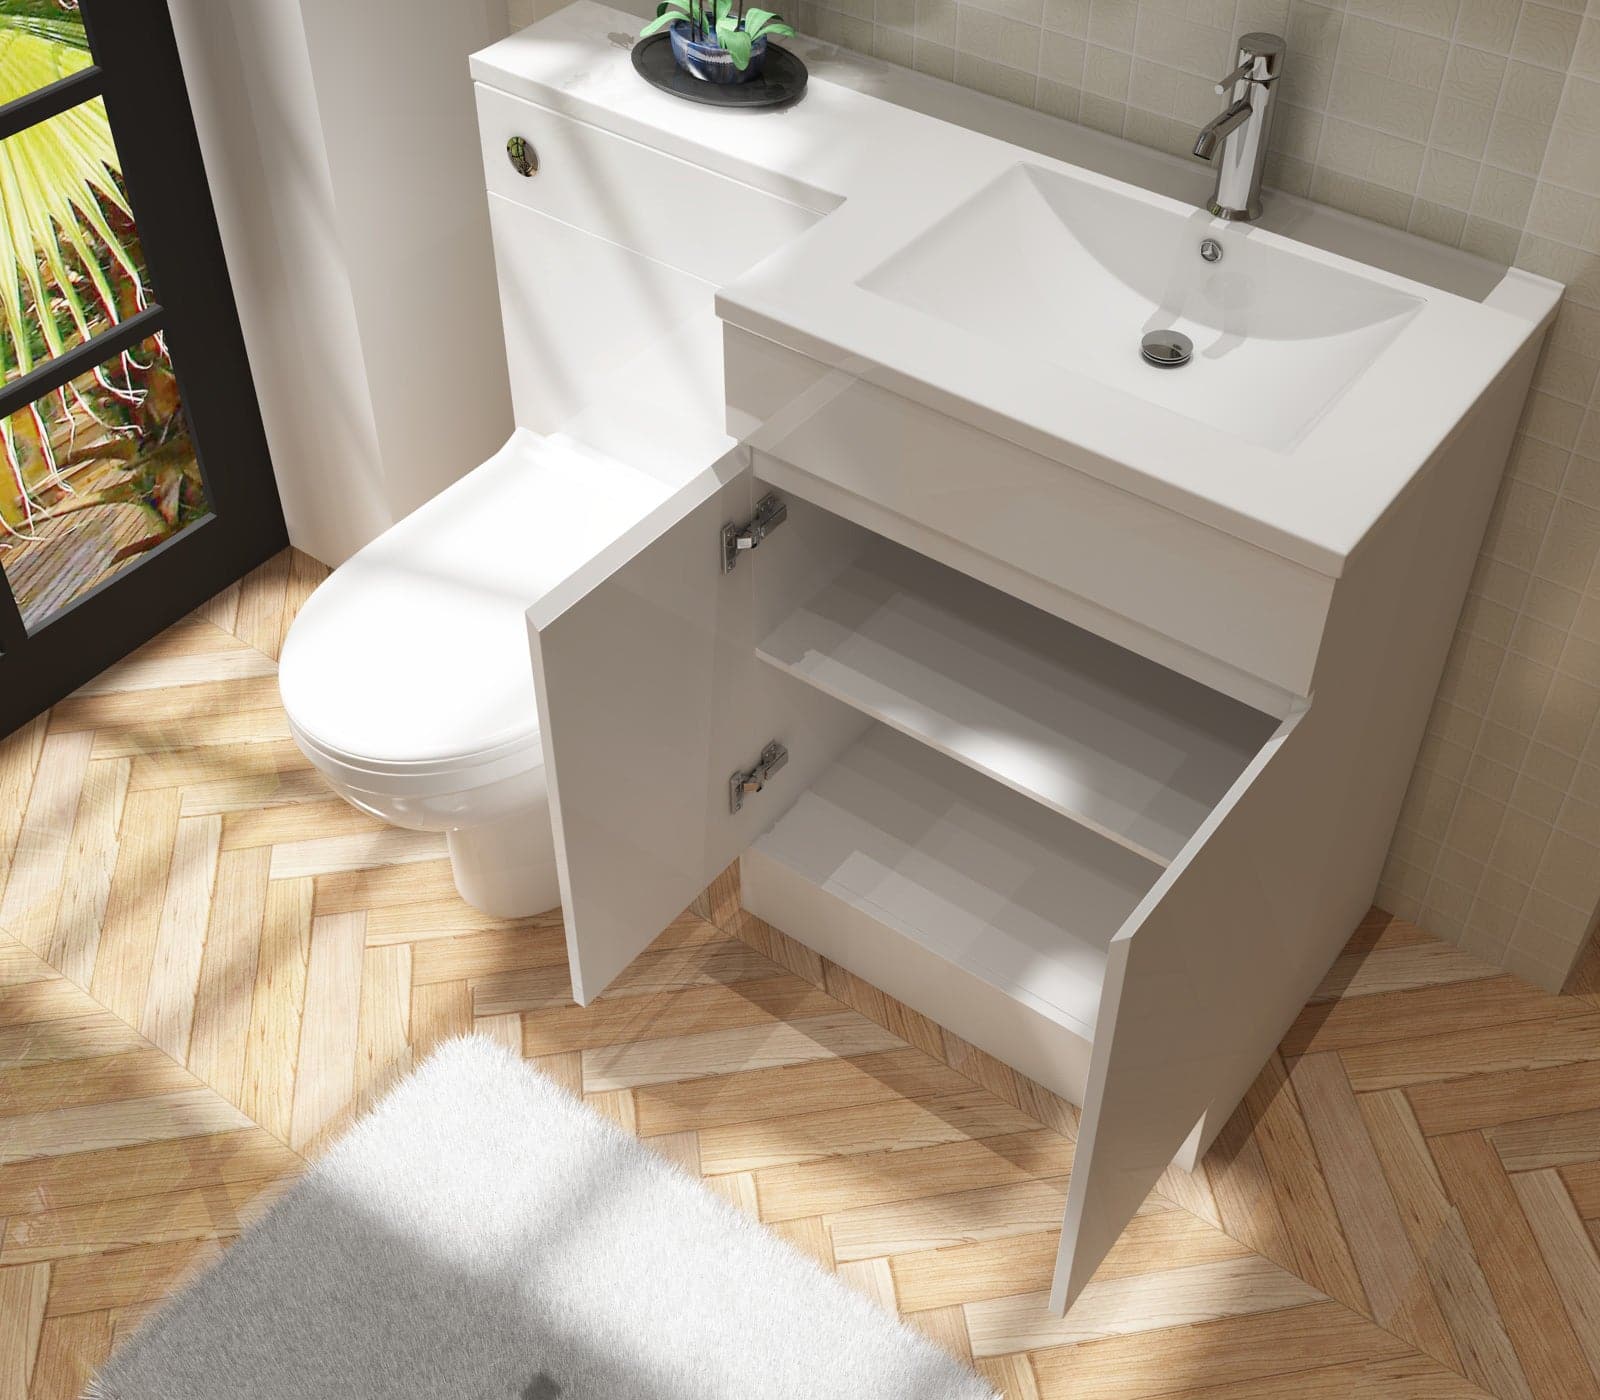 Gamma L Shape Vanity & WC Unit with Toilet - RH in Gloss White featuring sleek design, durable build, and efficient storage solution. Perfect for modern UK bathrooms.